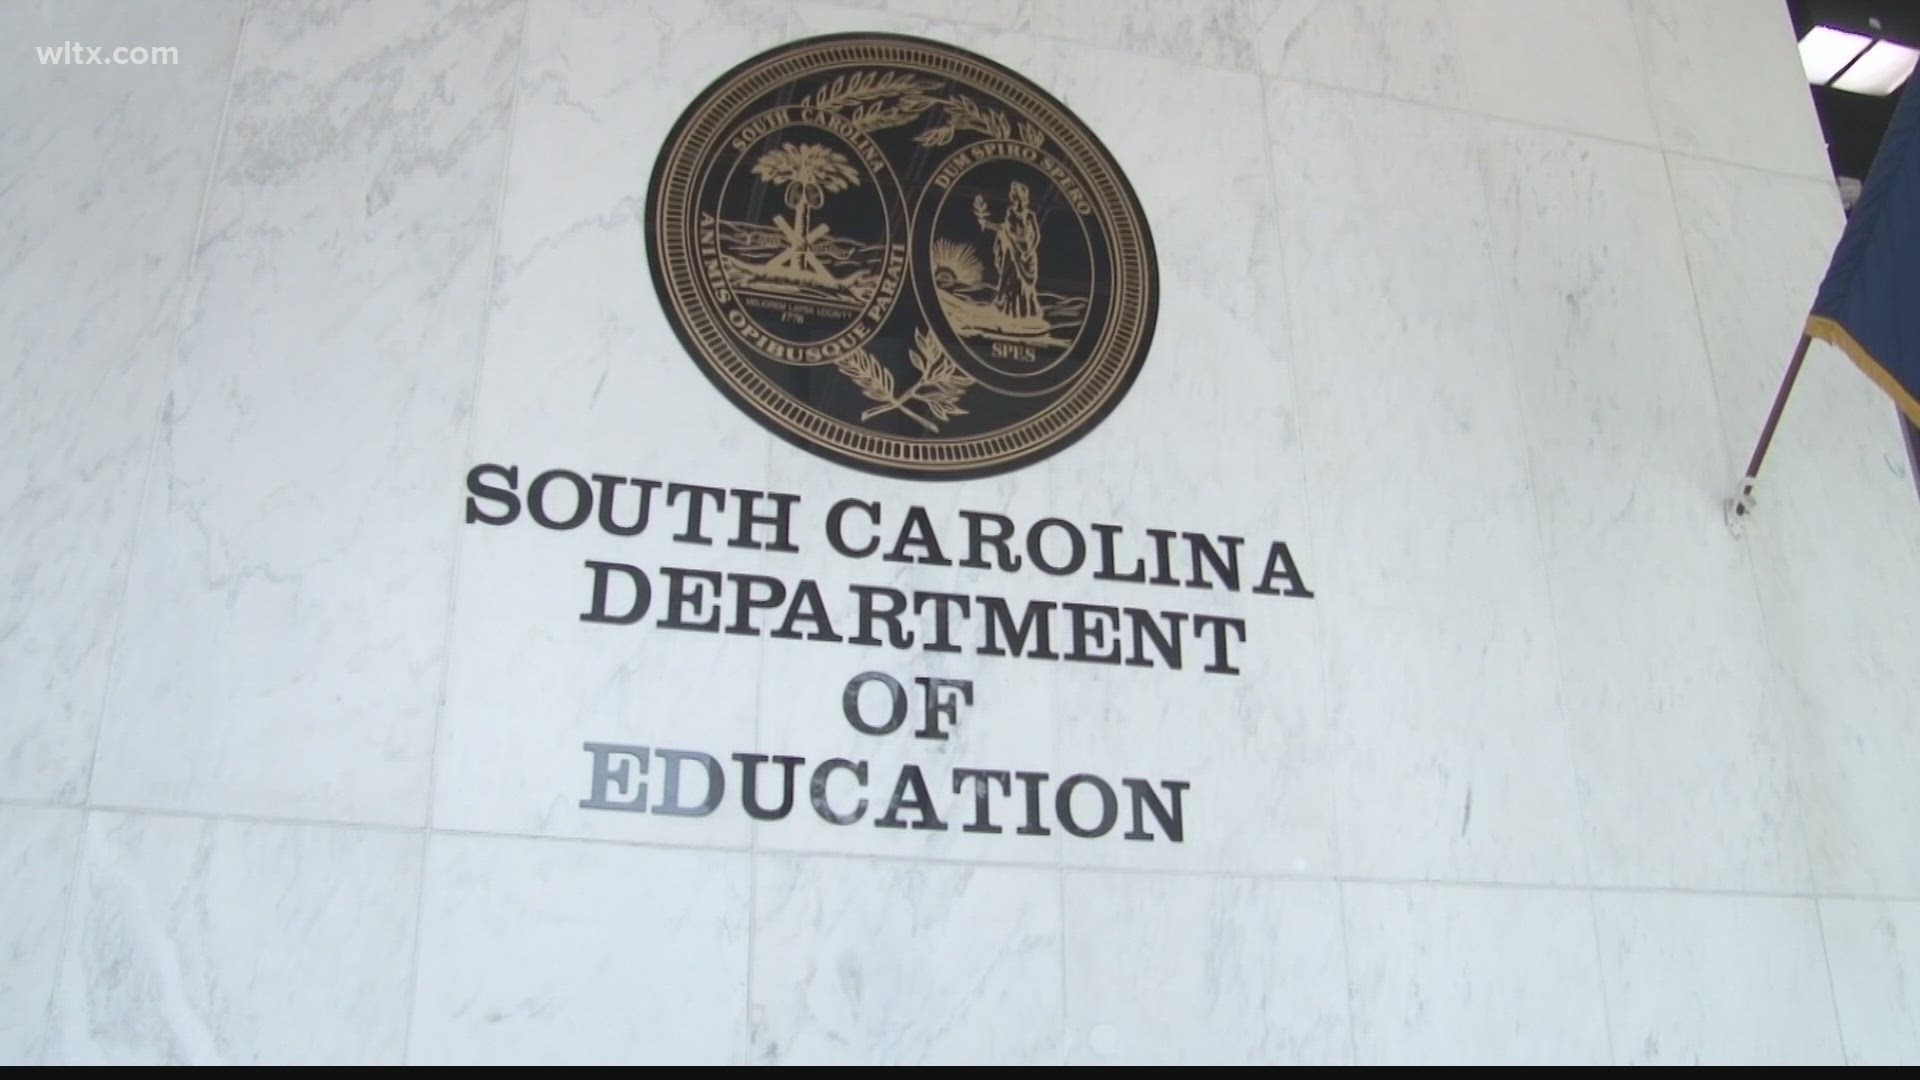 The 50-year partnership is officially over in the Palmetto State after Superintendent Ellen Weaver's decision to cut ties with SCASL.